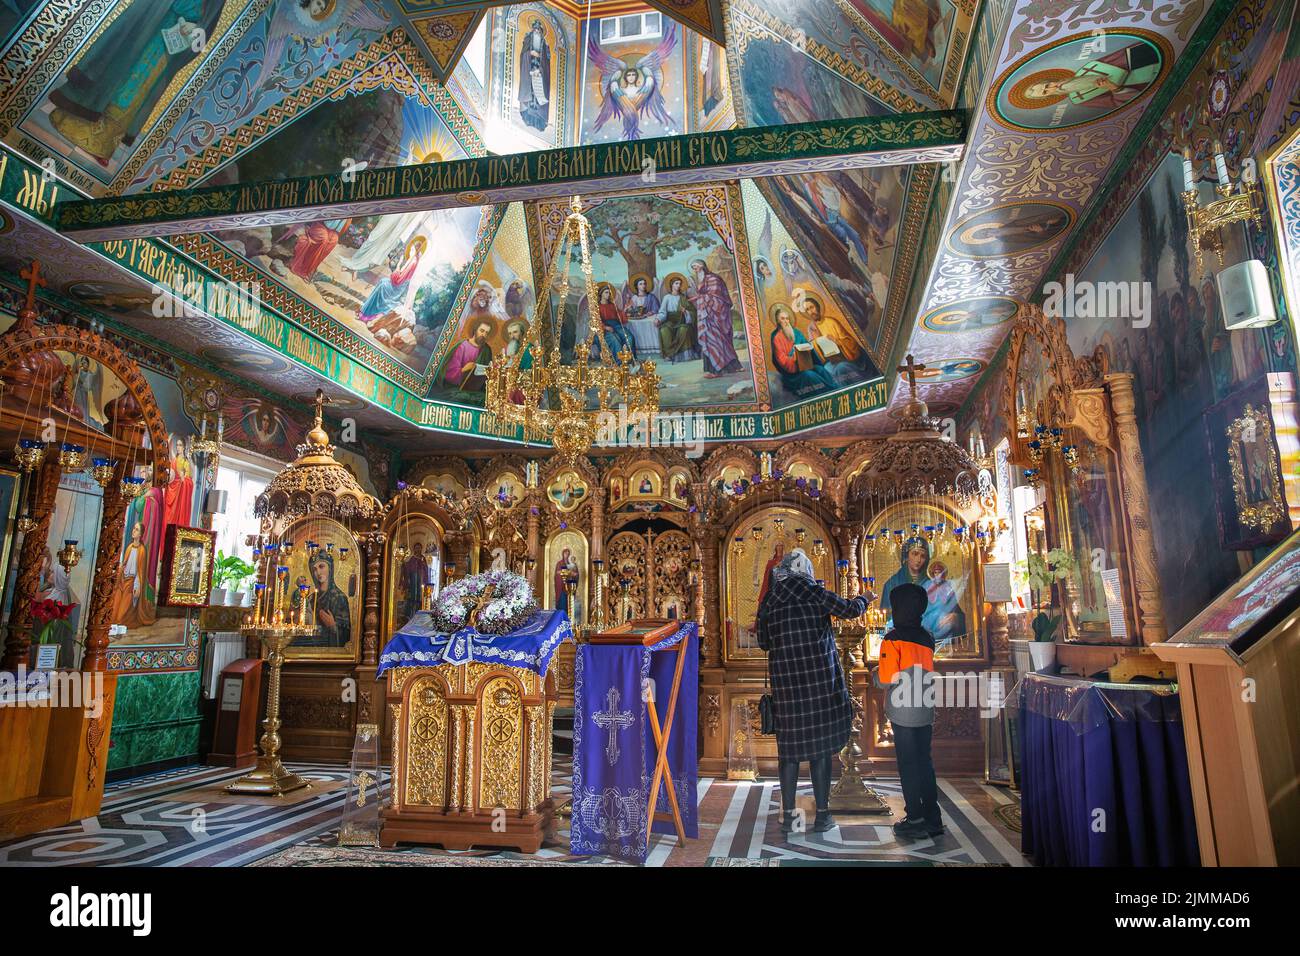 People visit church in miraculous spring of St. Anna in Monastery of St. Nicholas convent. Onyshkivtsi, Western Ukraine. Stock Photo